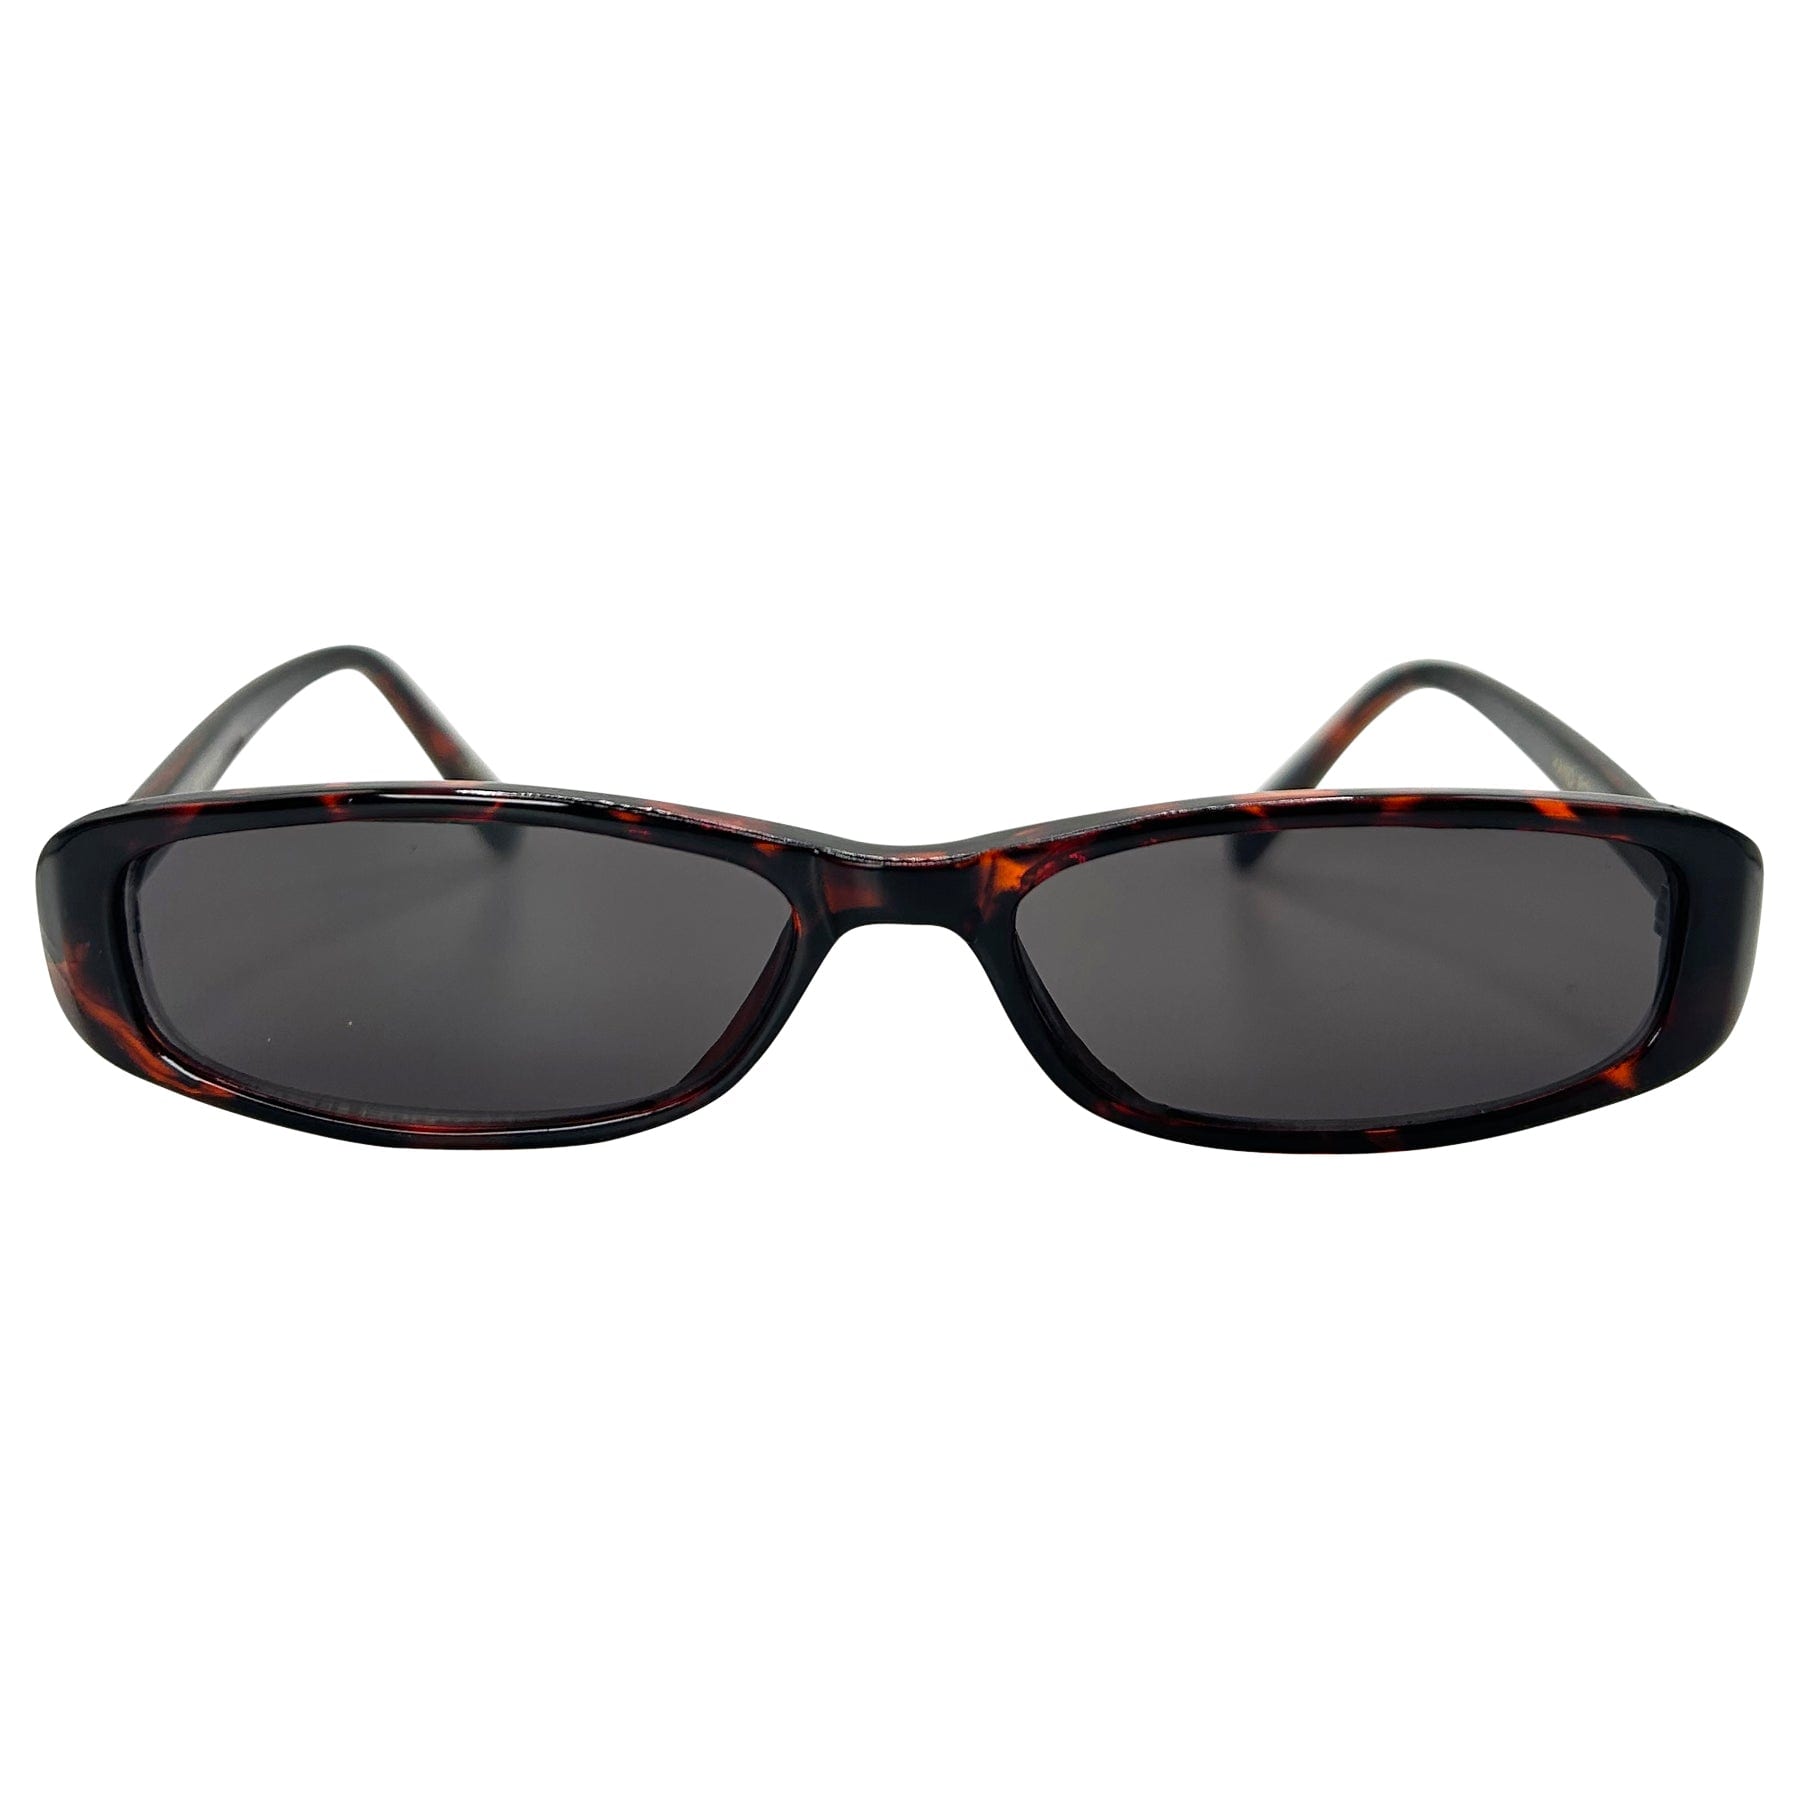 tortoise shell sunglasses with a small 90s style frame 